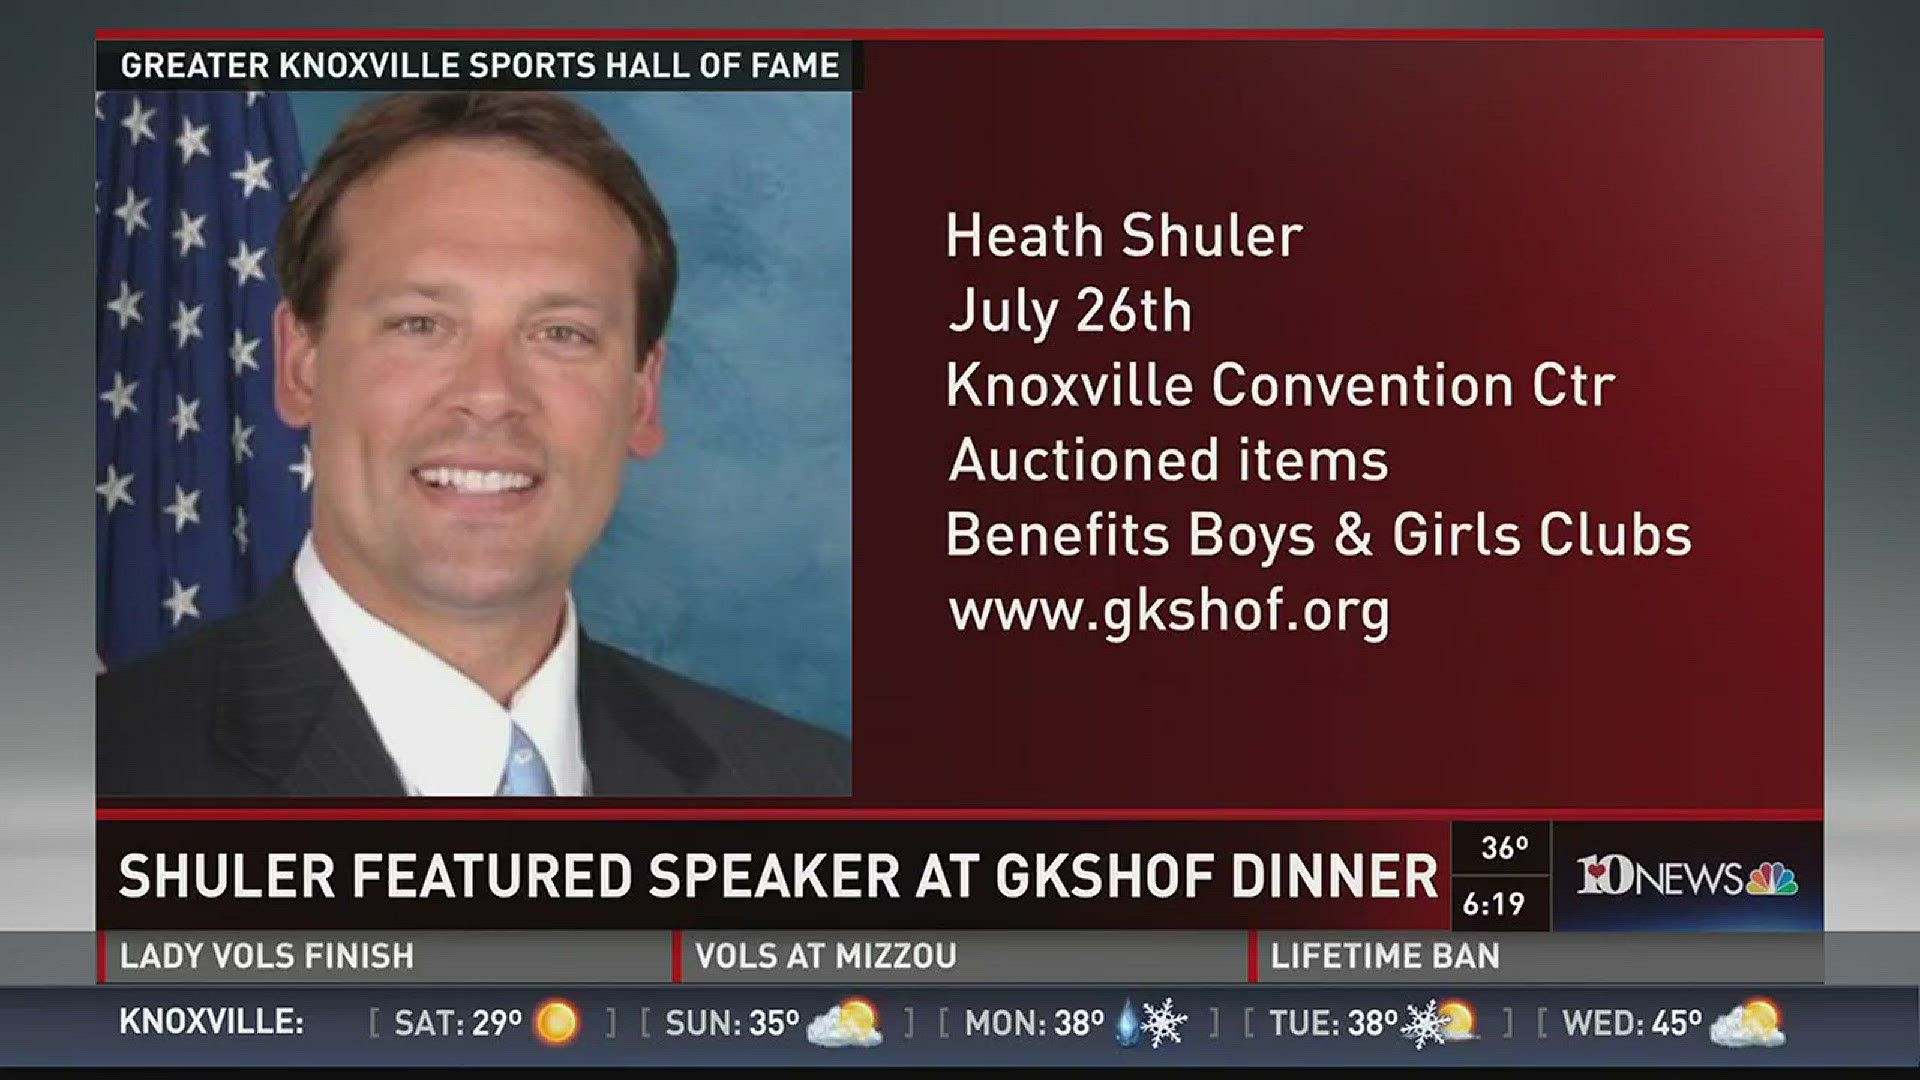 Heath Shuler will speak July 26th at the Knoxville Convention Center